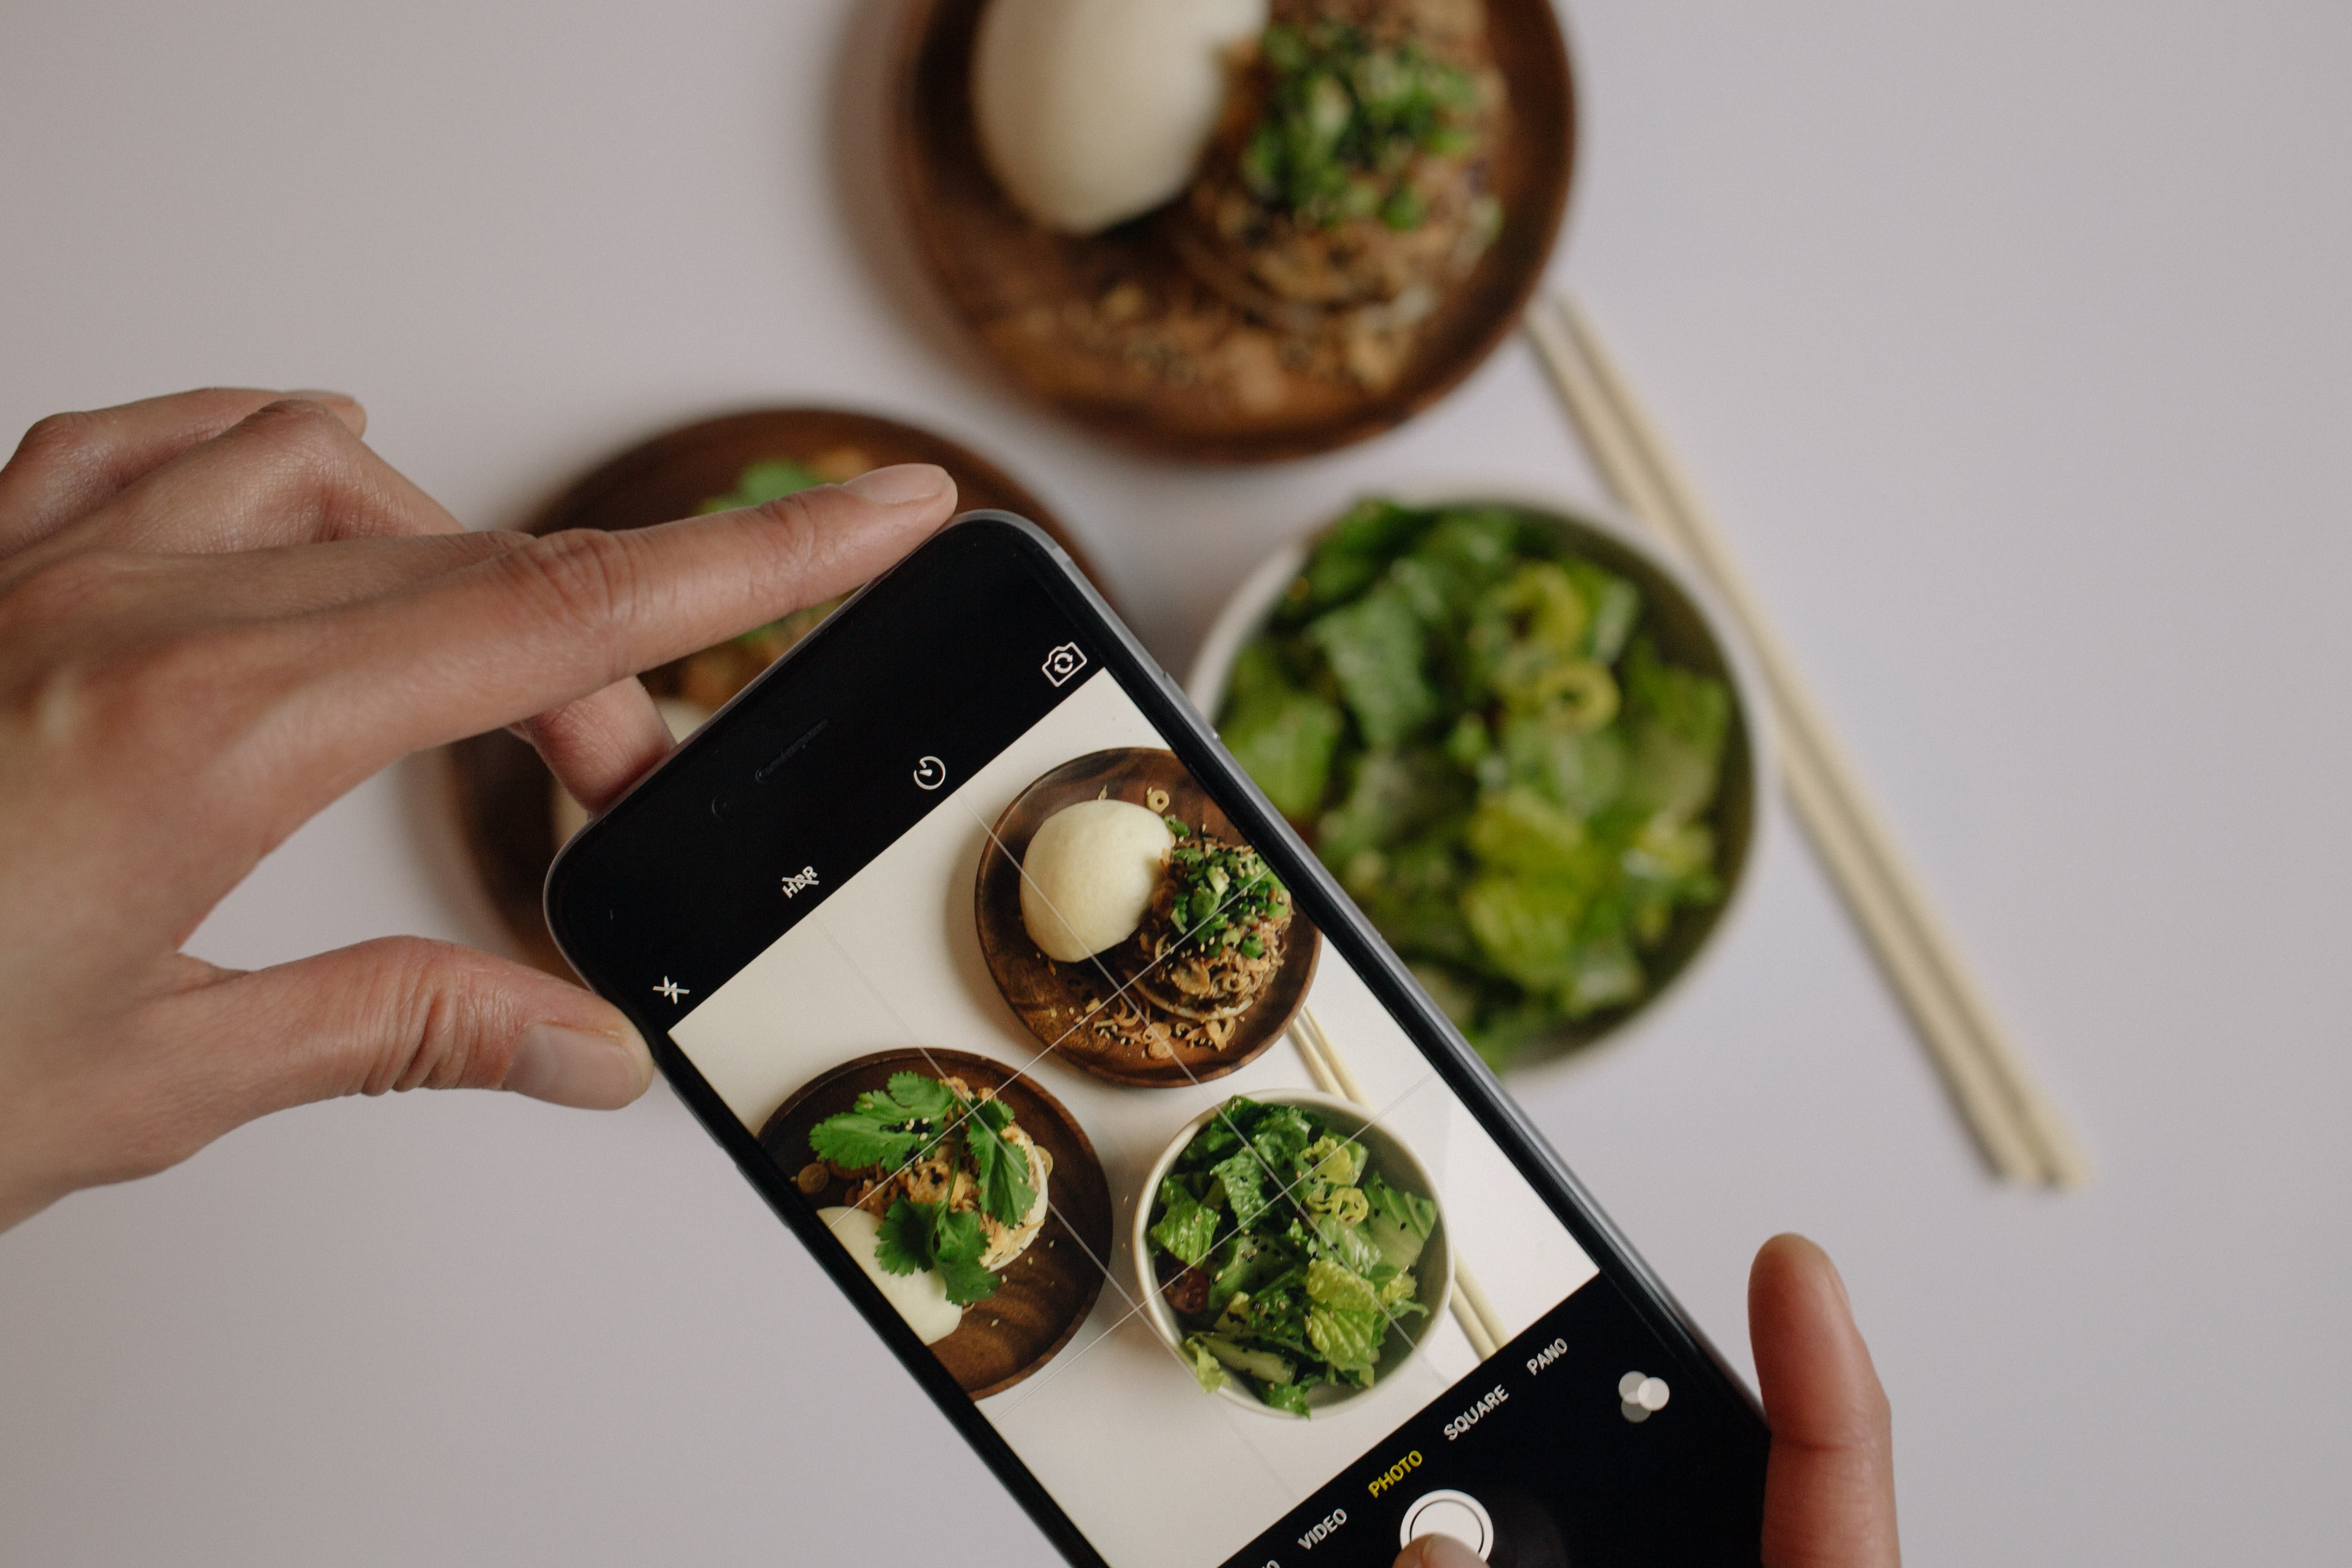 How To Get Your Photos On An Eatery’s Food Delivery Menu — And Win Vouchers At The Same Time